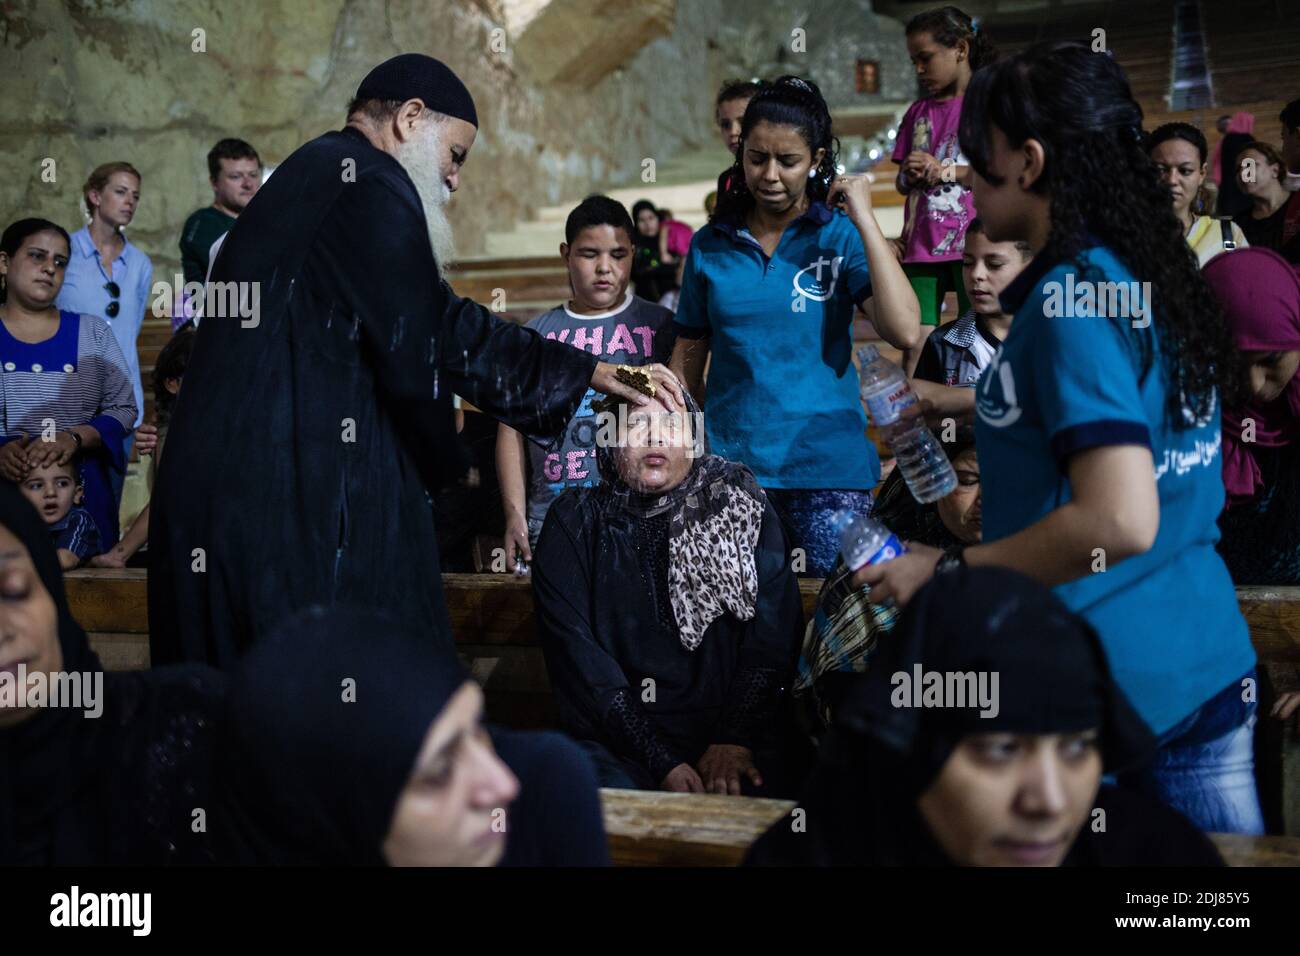 NO WEB/NO APPS - Coptic priest Father Samaan Ibrahim performs an exorcism session at the Saint Samaan (Simon) Church also known as the Cave Church in the Mokattam village, nicknamed as “Garbage City,” in Cairo, Egypt on August 19, 2016. Once a week hundreds of Muslims gather at the church after the prayer, to attend a session of exorcism performed by the priest. With a cross and holy water he fights spiritual entities and demons. The Monastery has an amphitheater with a seating capacity of 20,000 making it the largest Christian church in the Middle East. It is named after the Coptic Saint, Sim Stock Photo